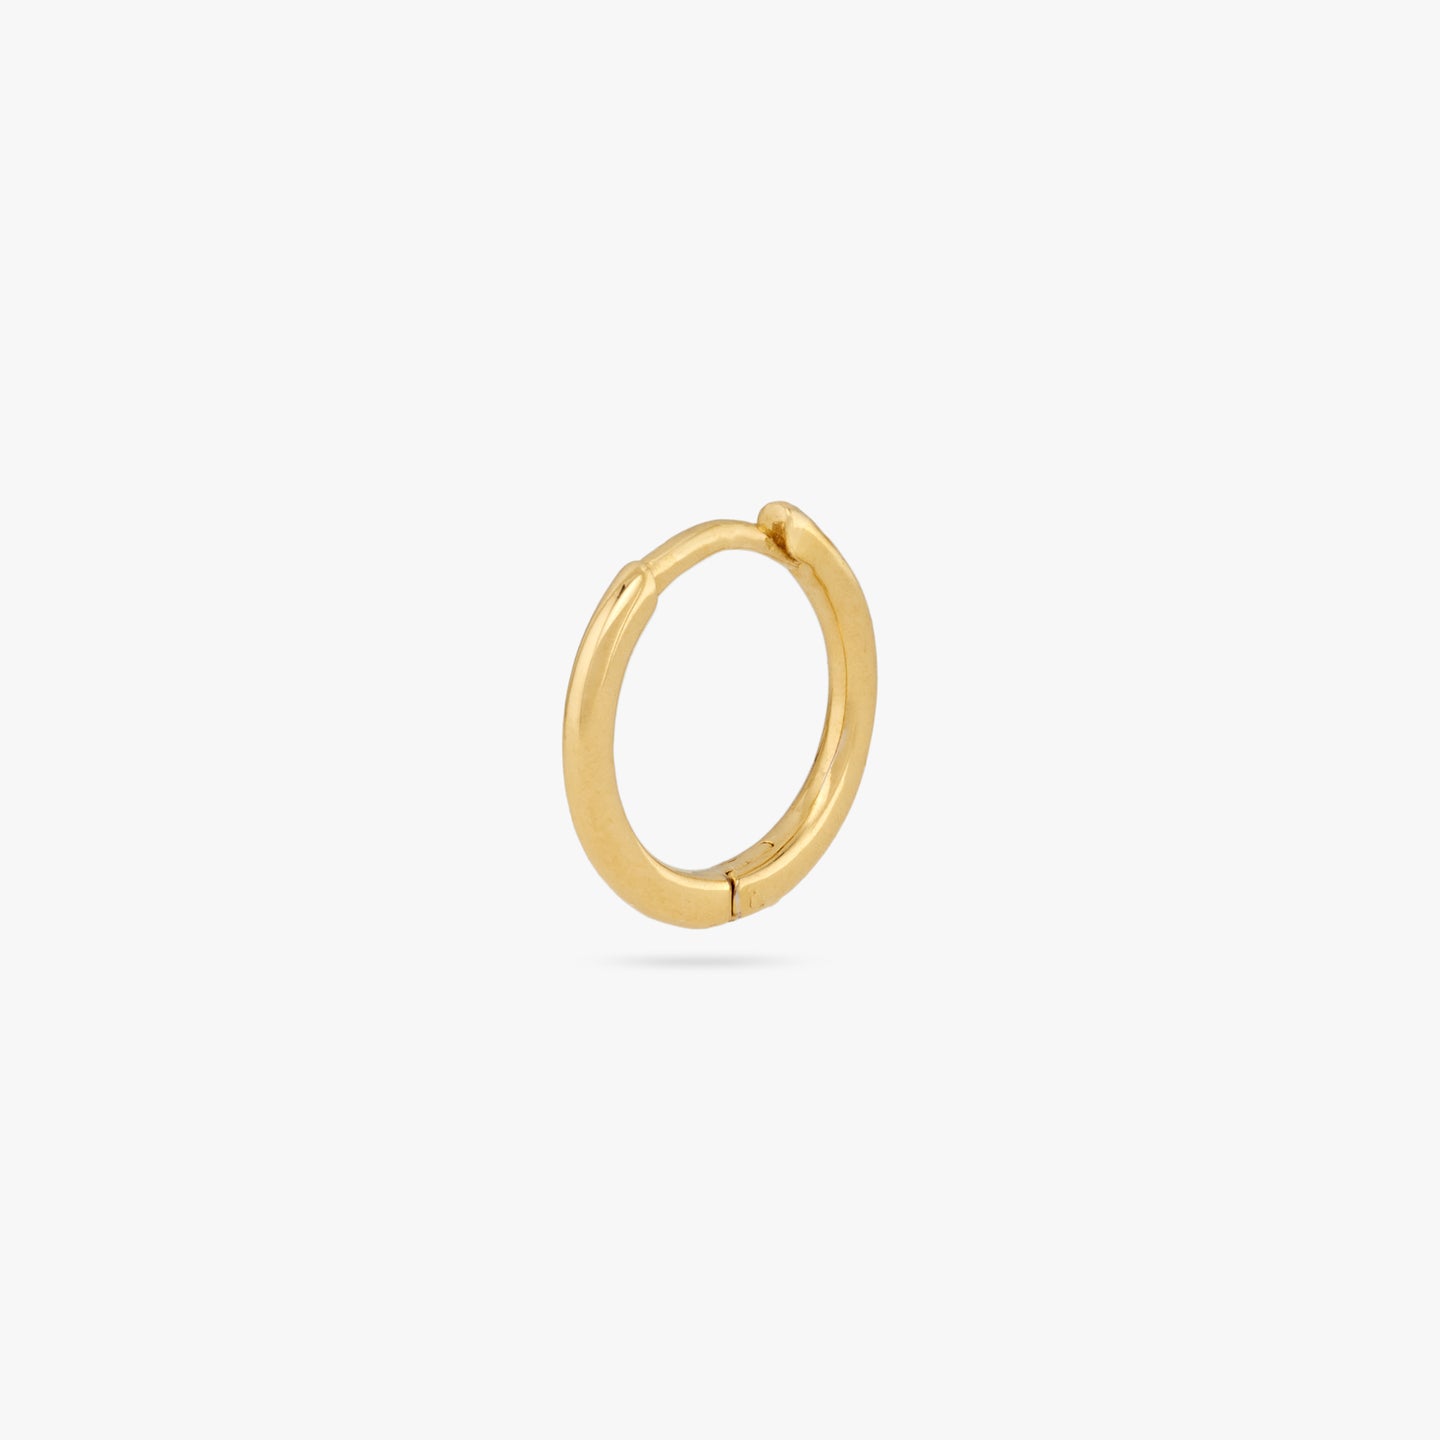 This is a small gold huggie with square edges color:null|gold